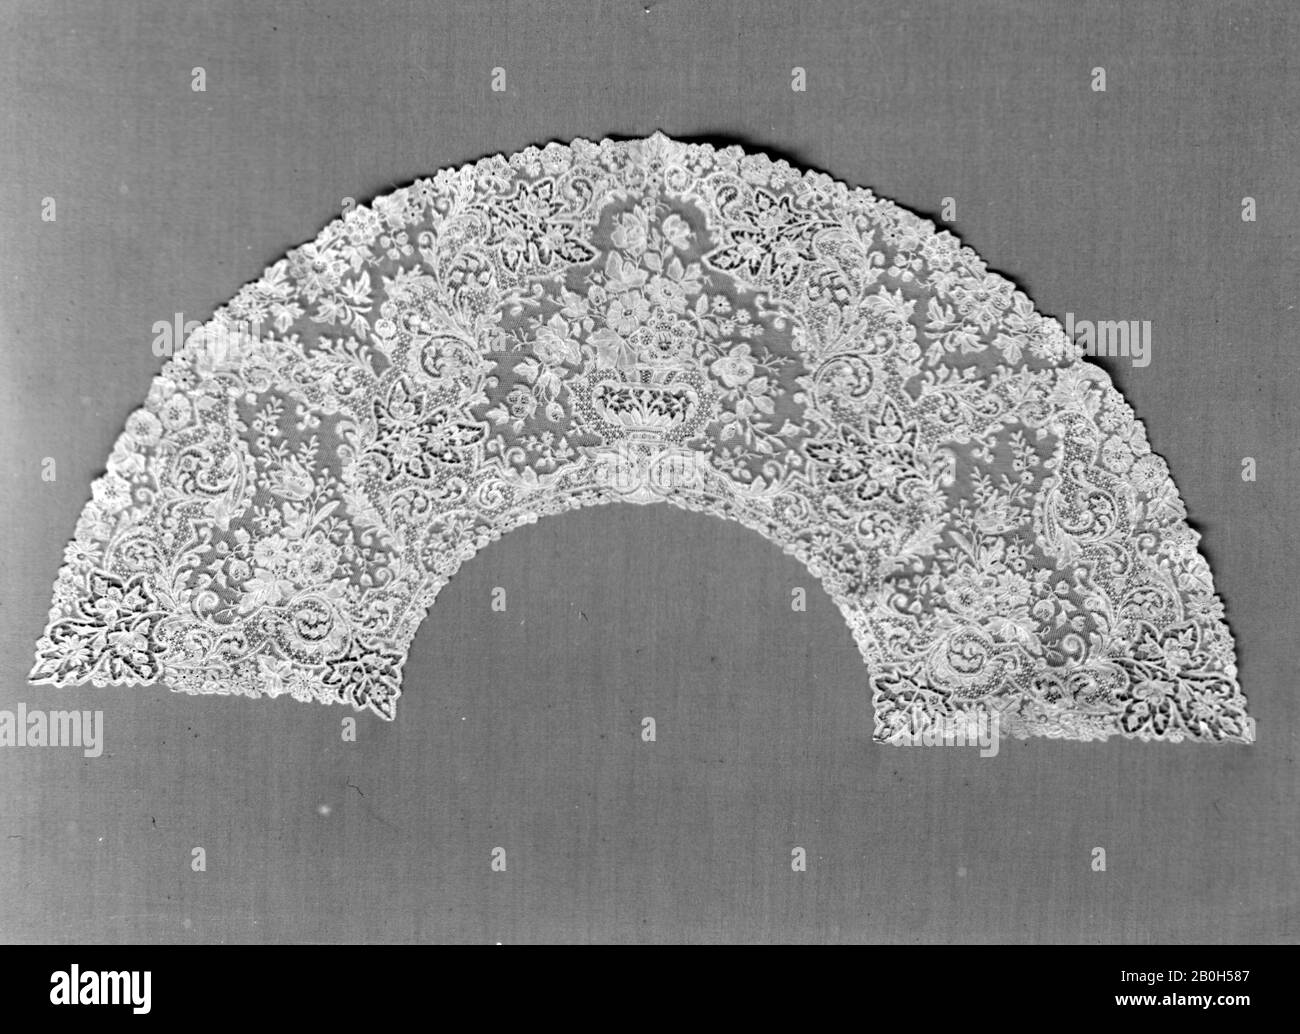 Fan leaf, French, 1882, French, Bobbin lace, point d'Angleterre, L. 15 1/2 x W. 7 inches (39.4 x 17.8 cm), Textiles-Laces Stock Photo